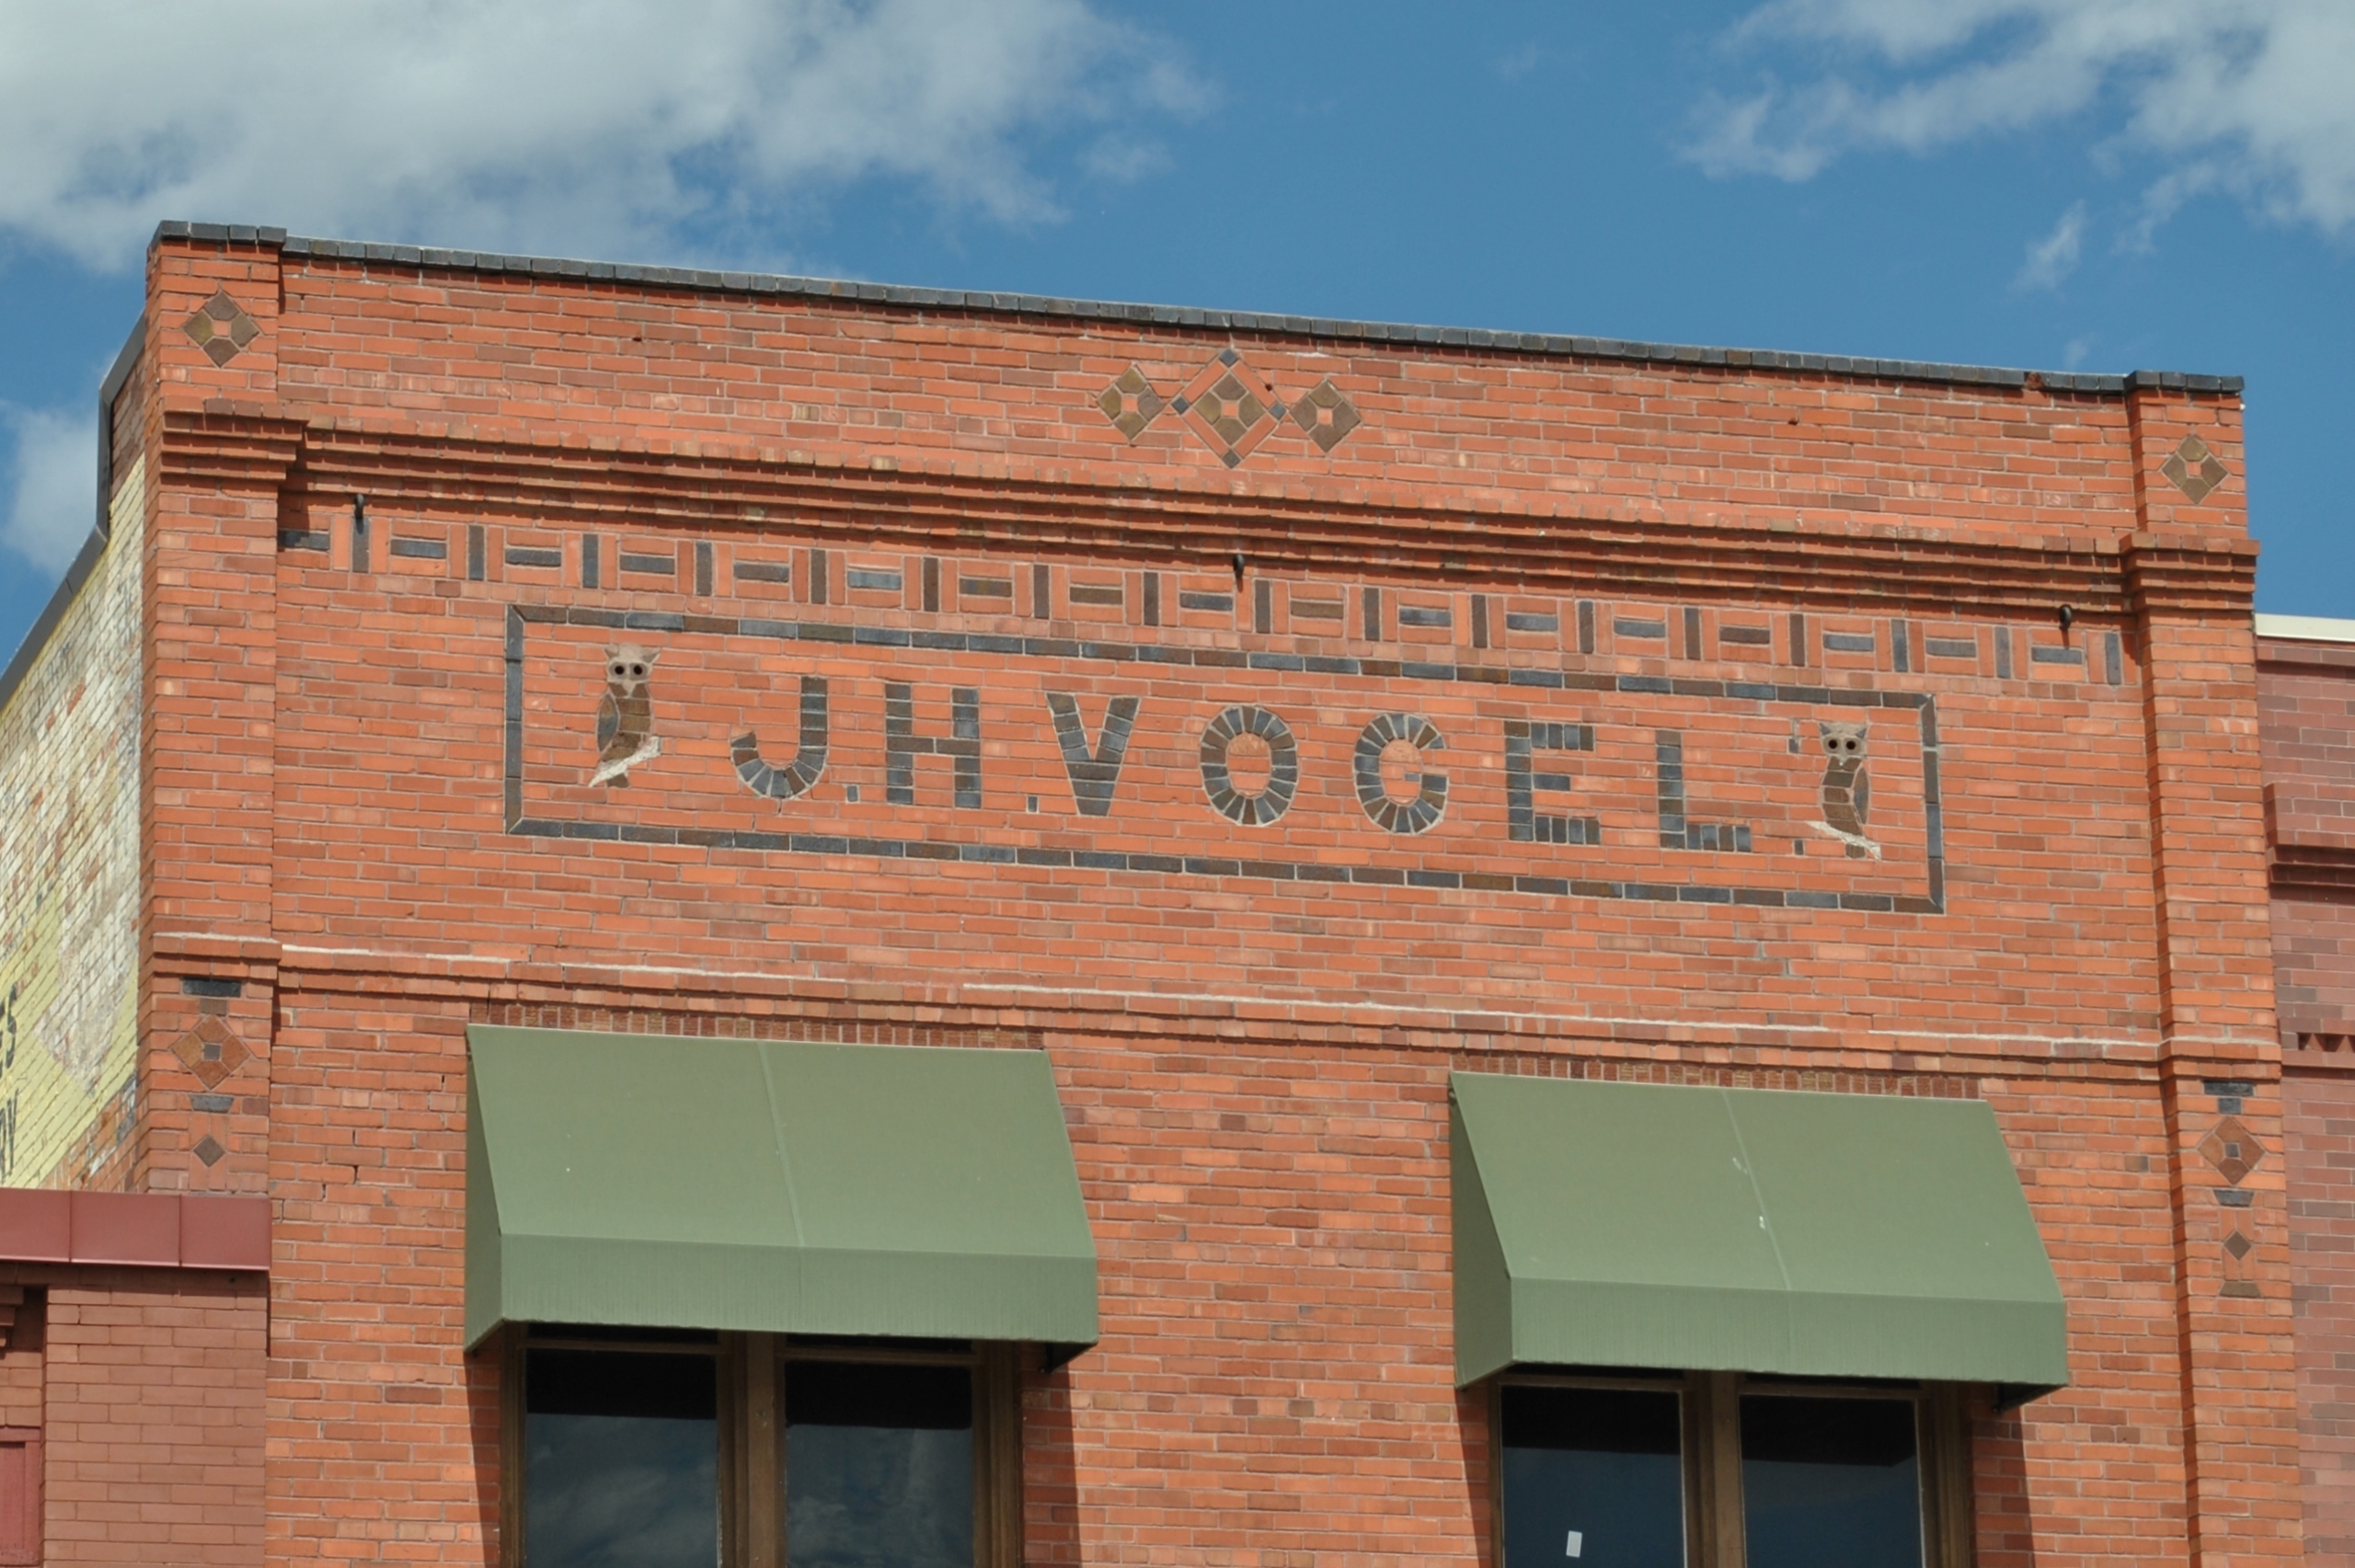 The exterior of the JH Vogel building in Cody Yellowstone